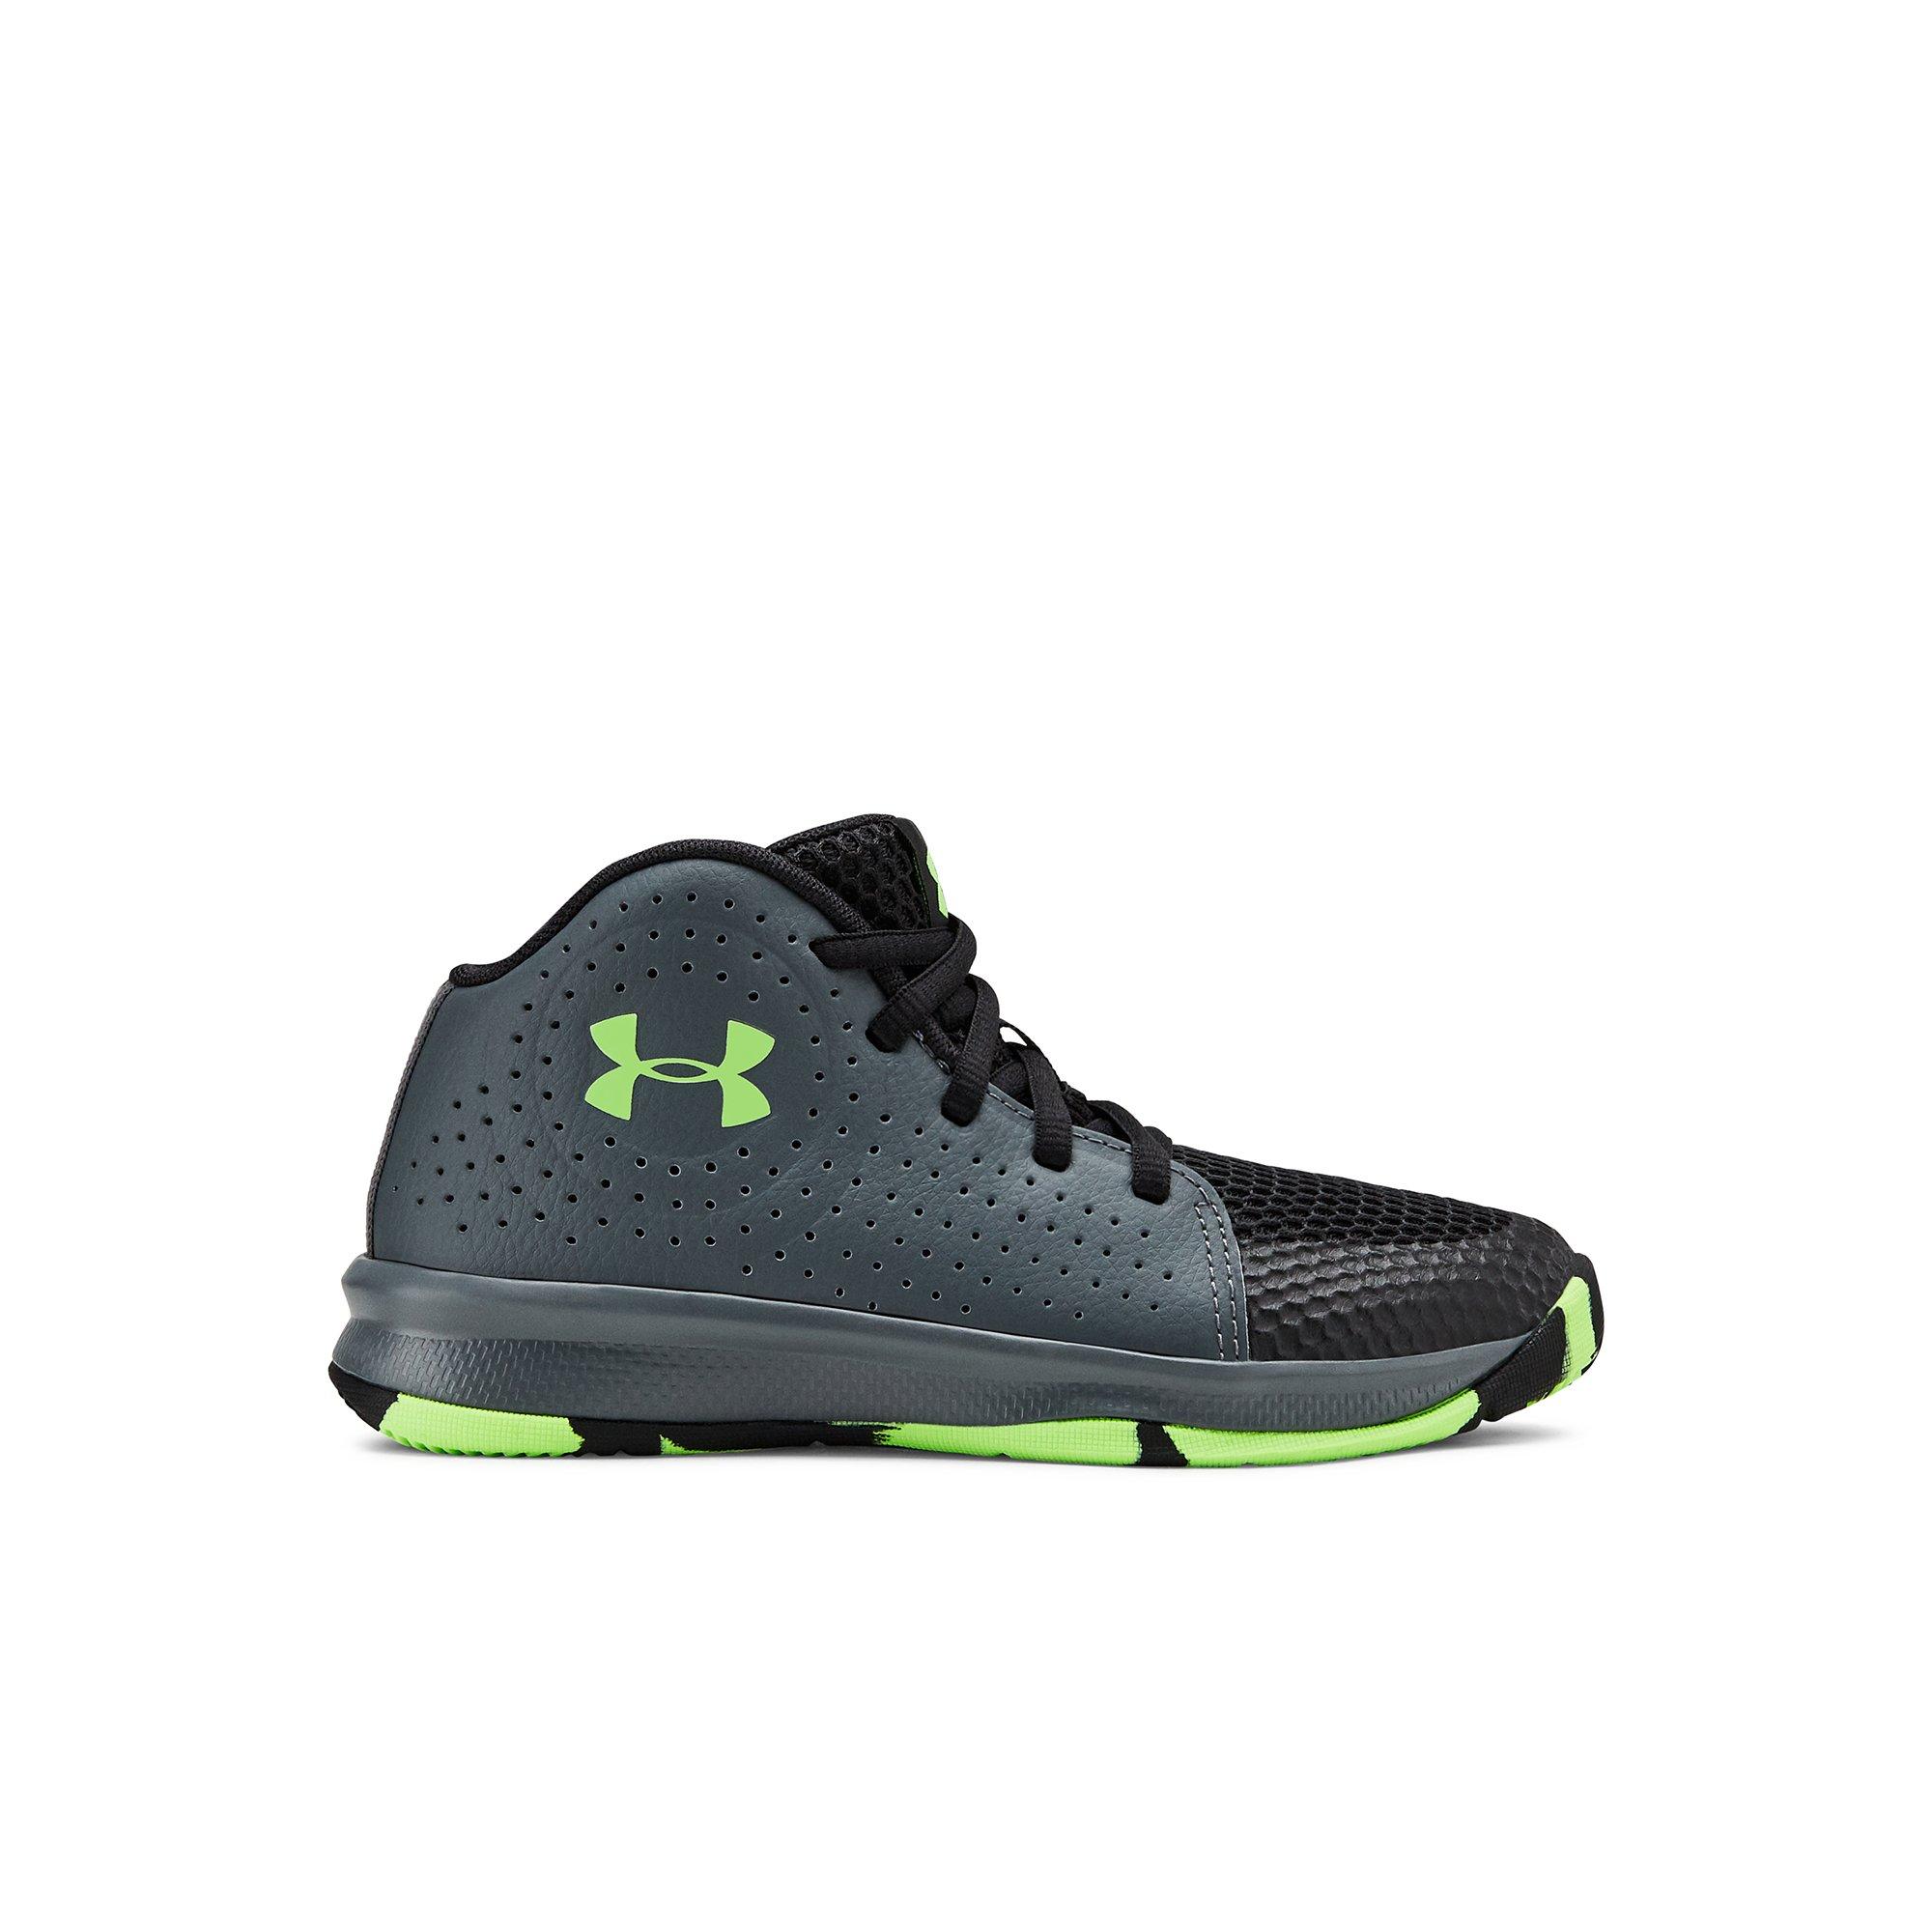 Under Armour Shoes | Athletic Shoes 